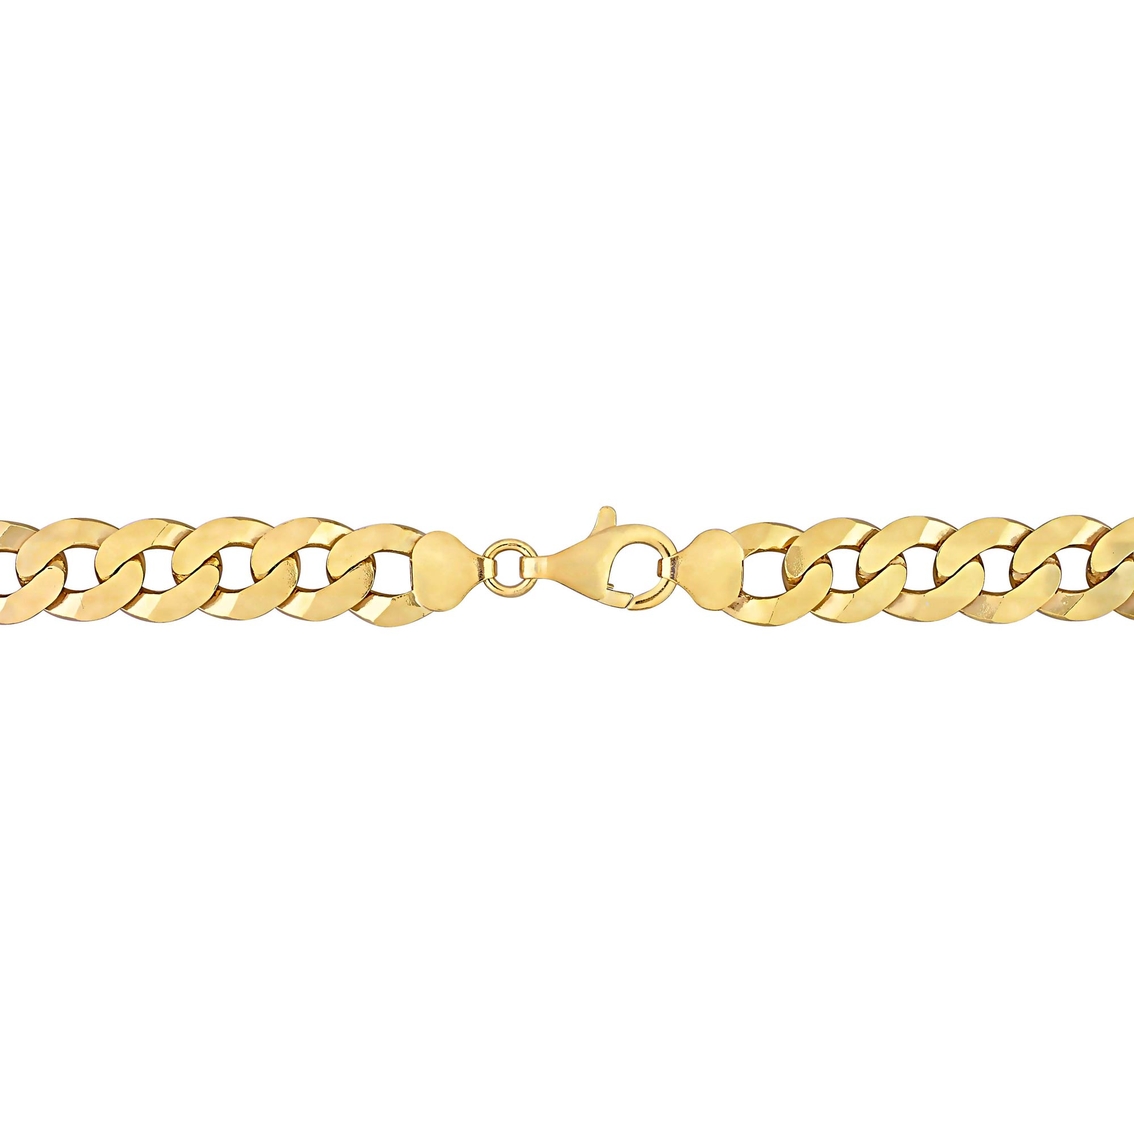 Sofia B. 18K Yellow Gold Over Sterling Silver 10mm Curb Link Chain Necklace - Image 2 of 4